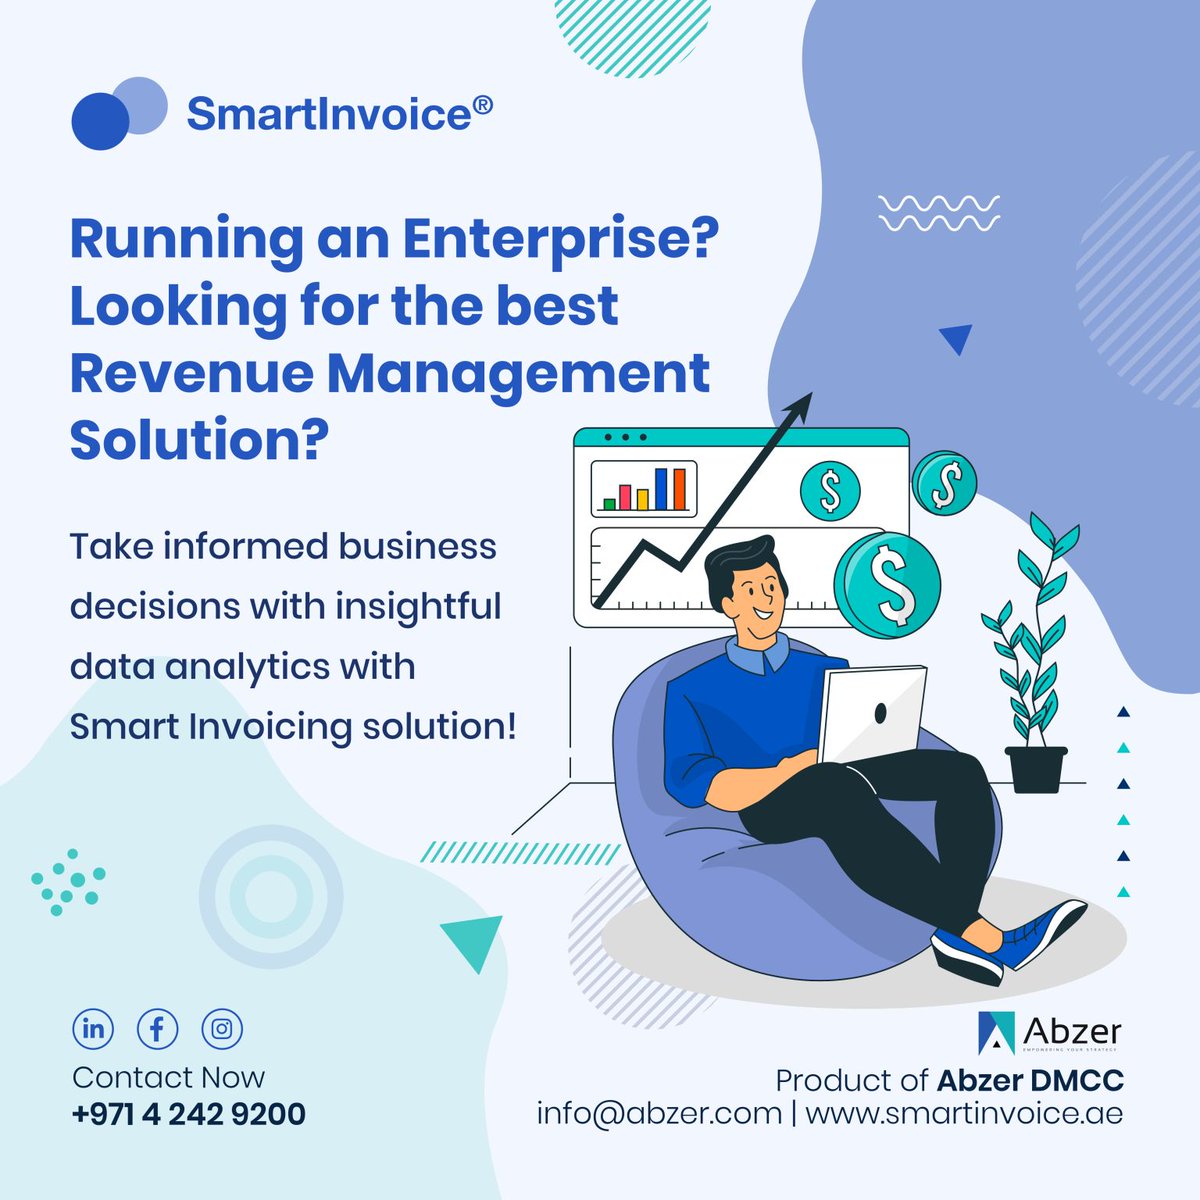 Struggling with invoicing ?
SmartInvoice can be your game-changer! Ditch the time-consuming manual processes and say hello to a simpler way to manage your finances. 

Visit : smartinvoice.ae

#SmallBusiness #InvoicingMadeEasy #Smartinvoice